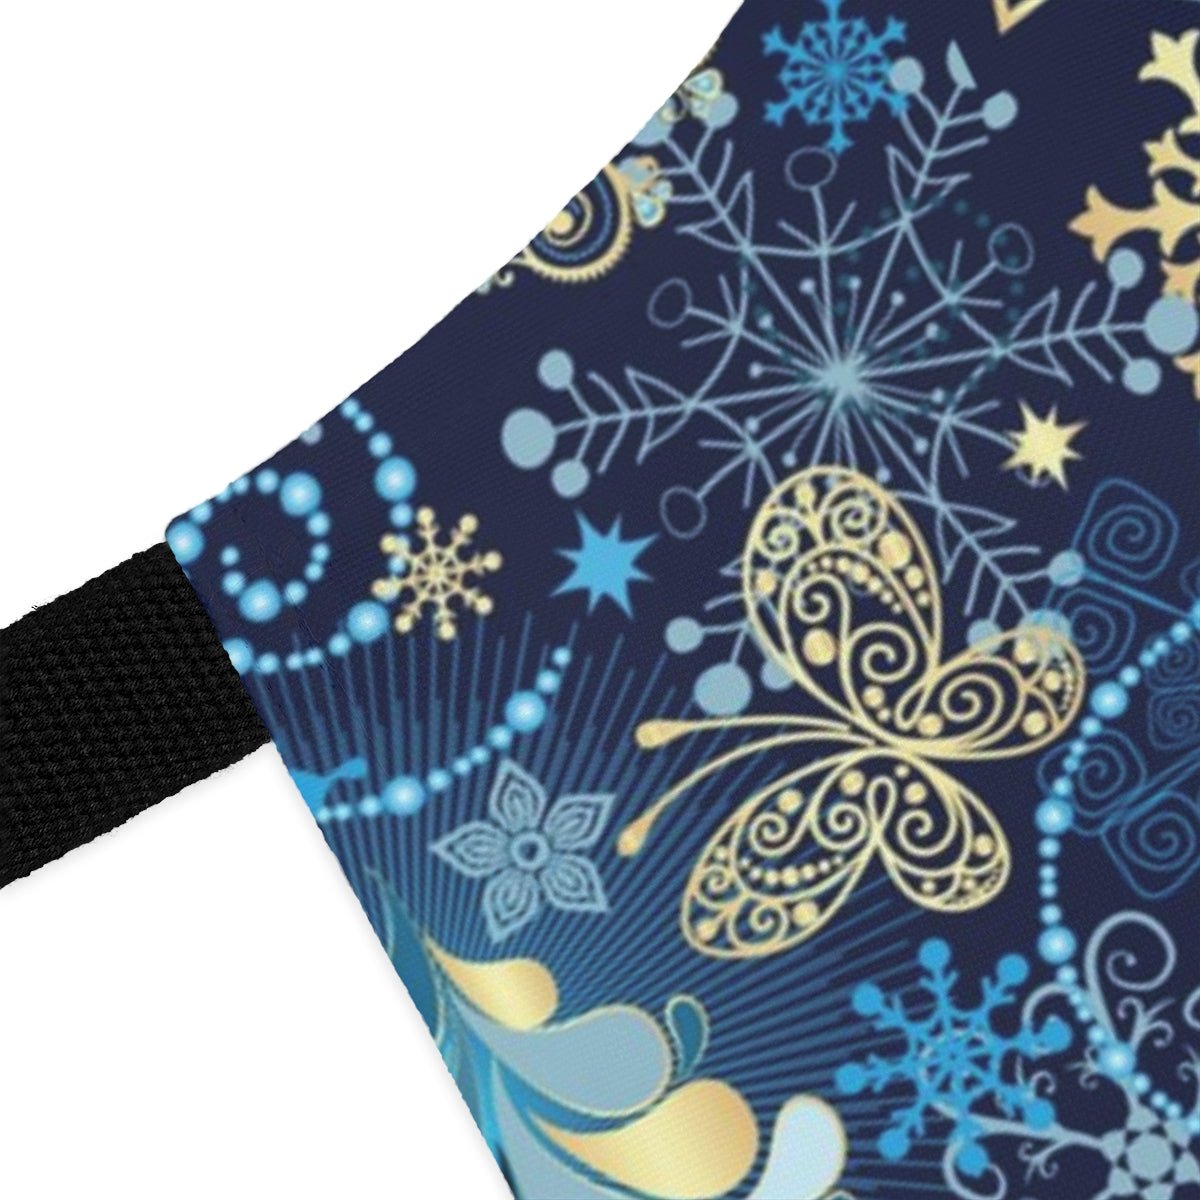 Magical Snowflakes Apron - Puffin Lime